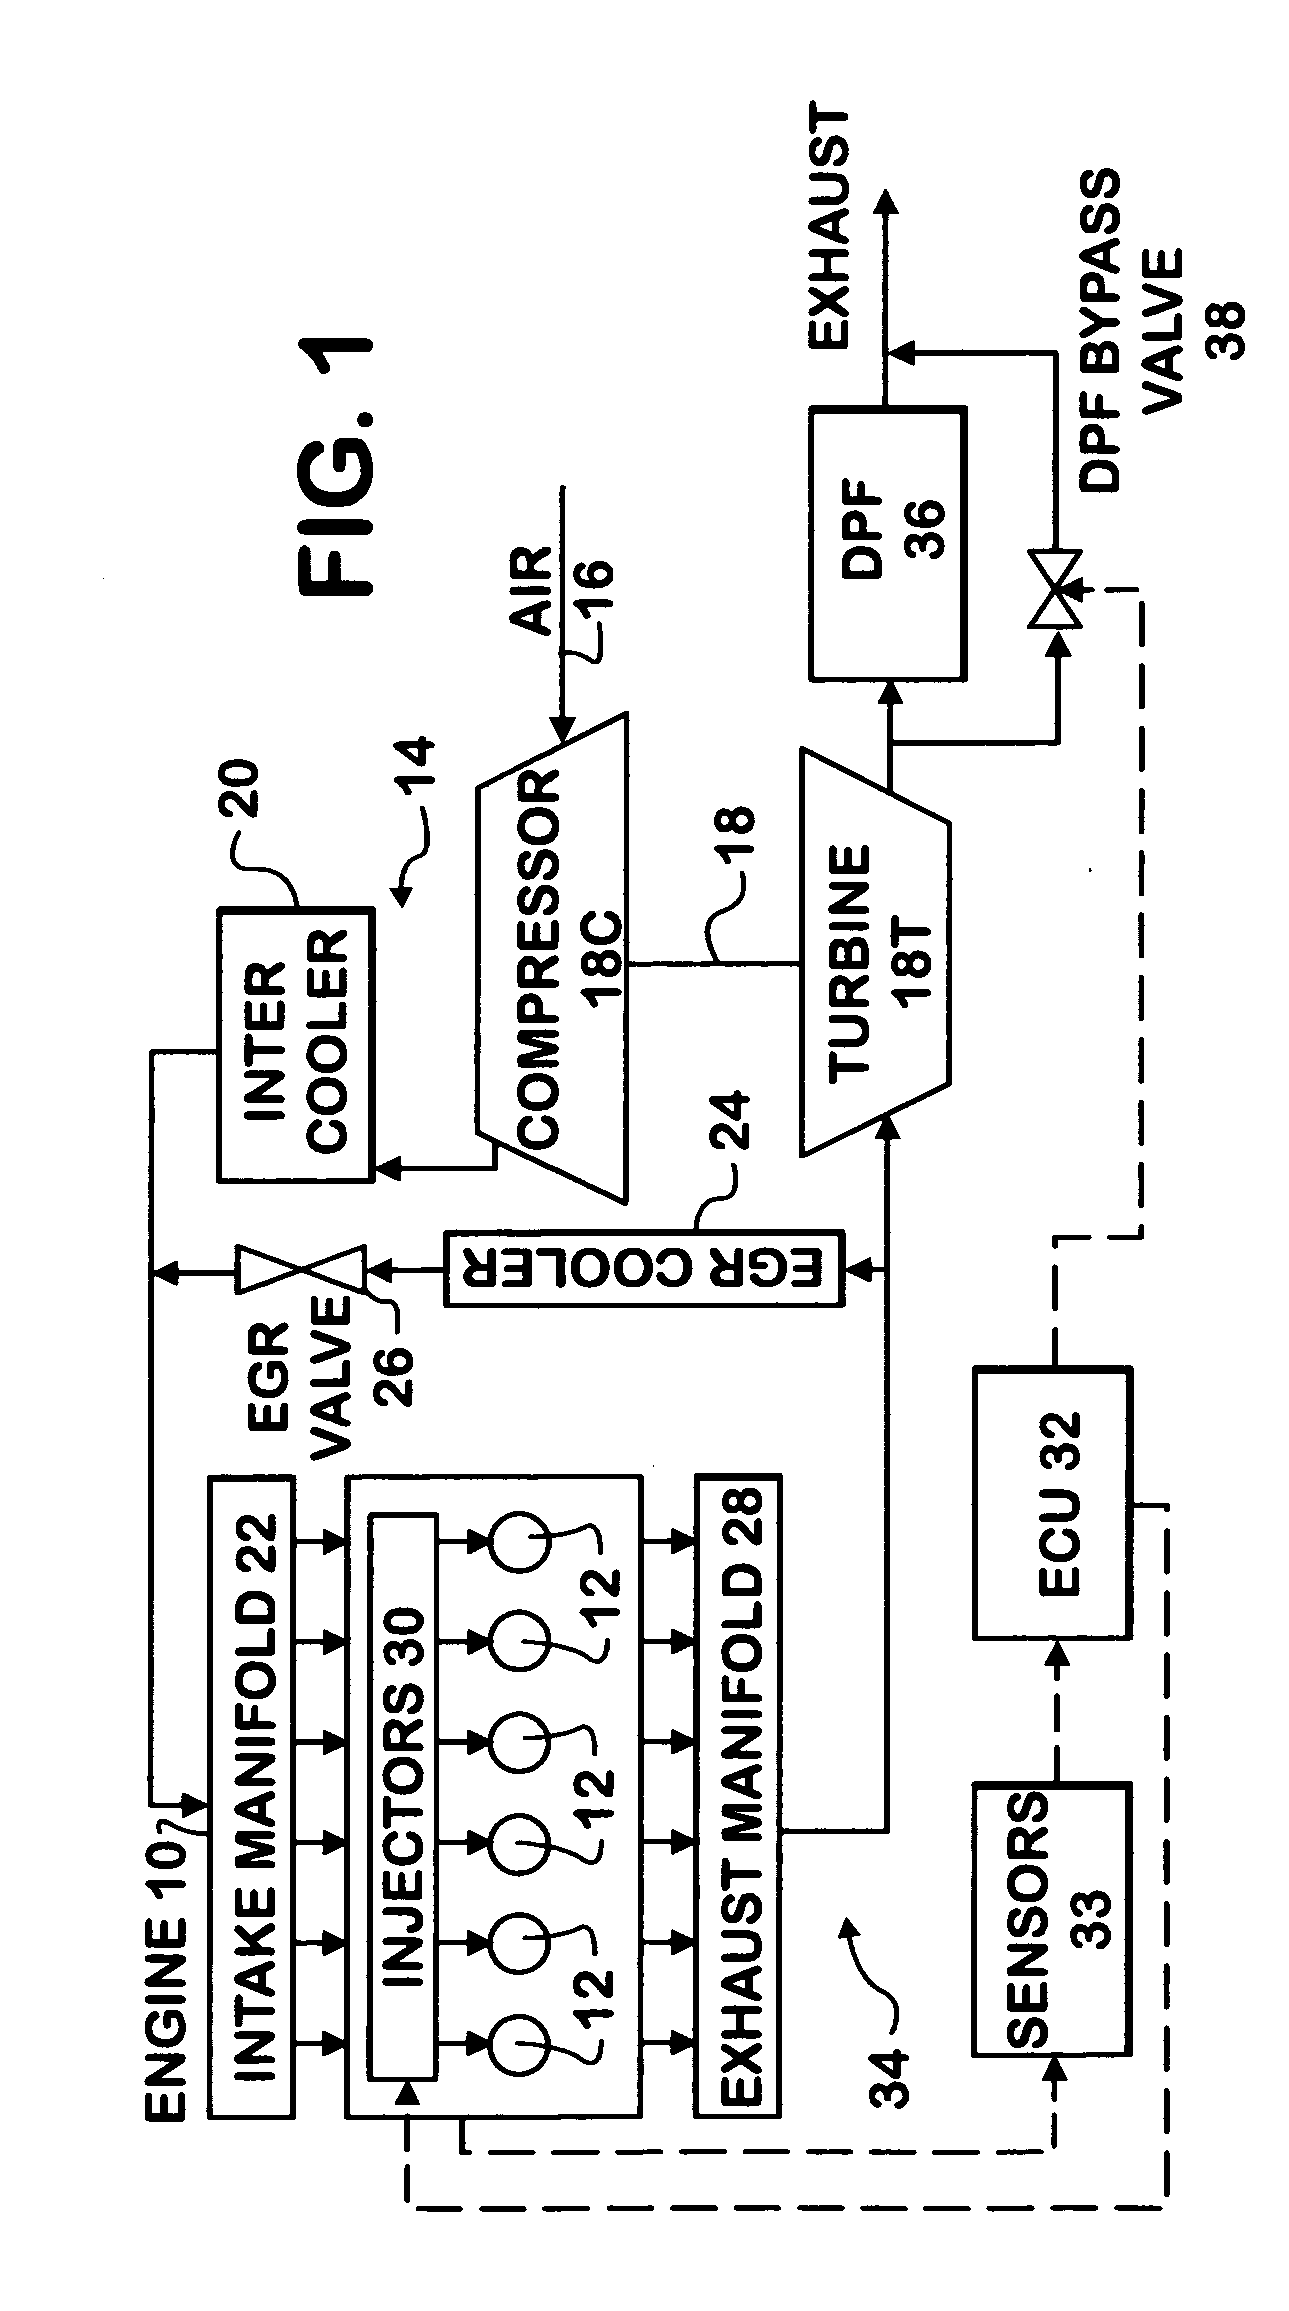 Strategy for selectively bypassing a DPF in a hybrid HCCI combustion engine